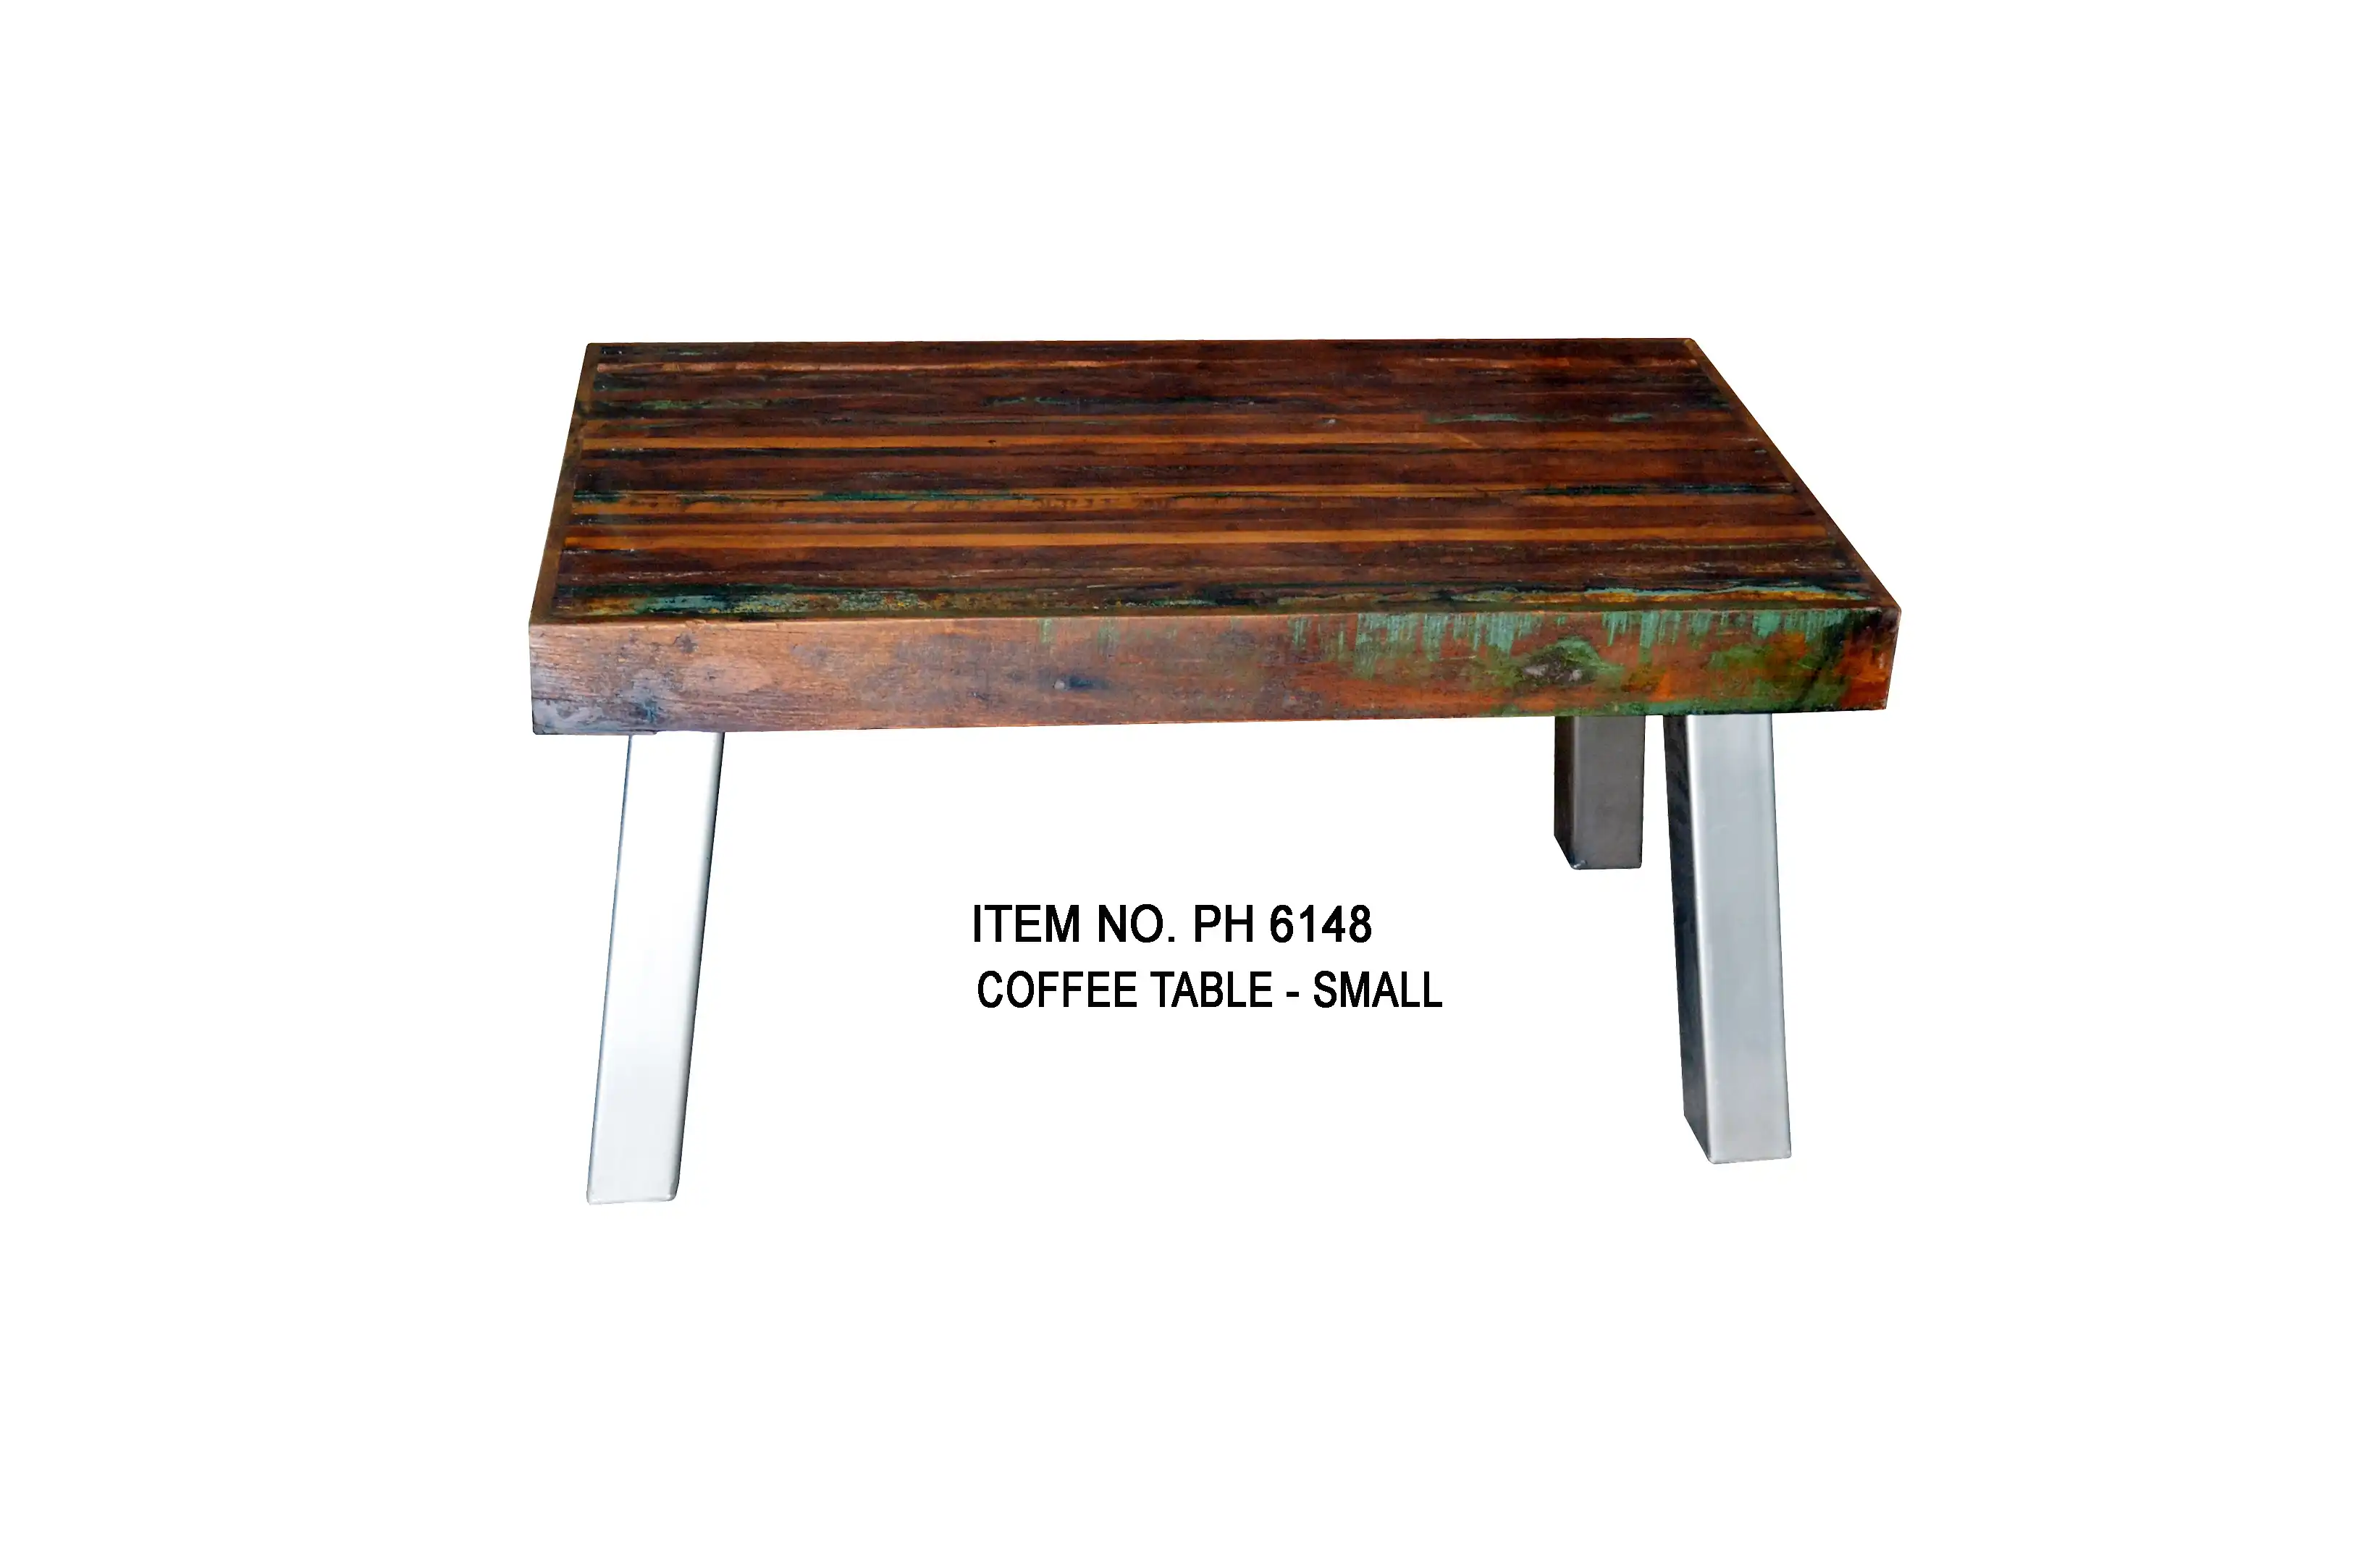 Reclaimed Wood Small Coffee Table with Leg Iron (KD) - popular handicrafts